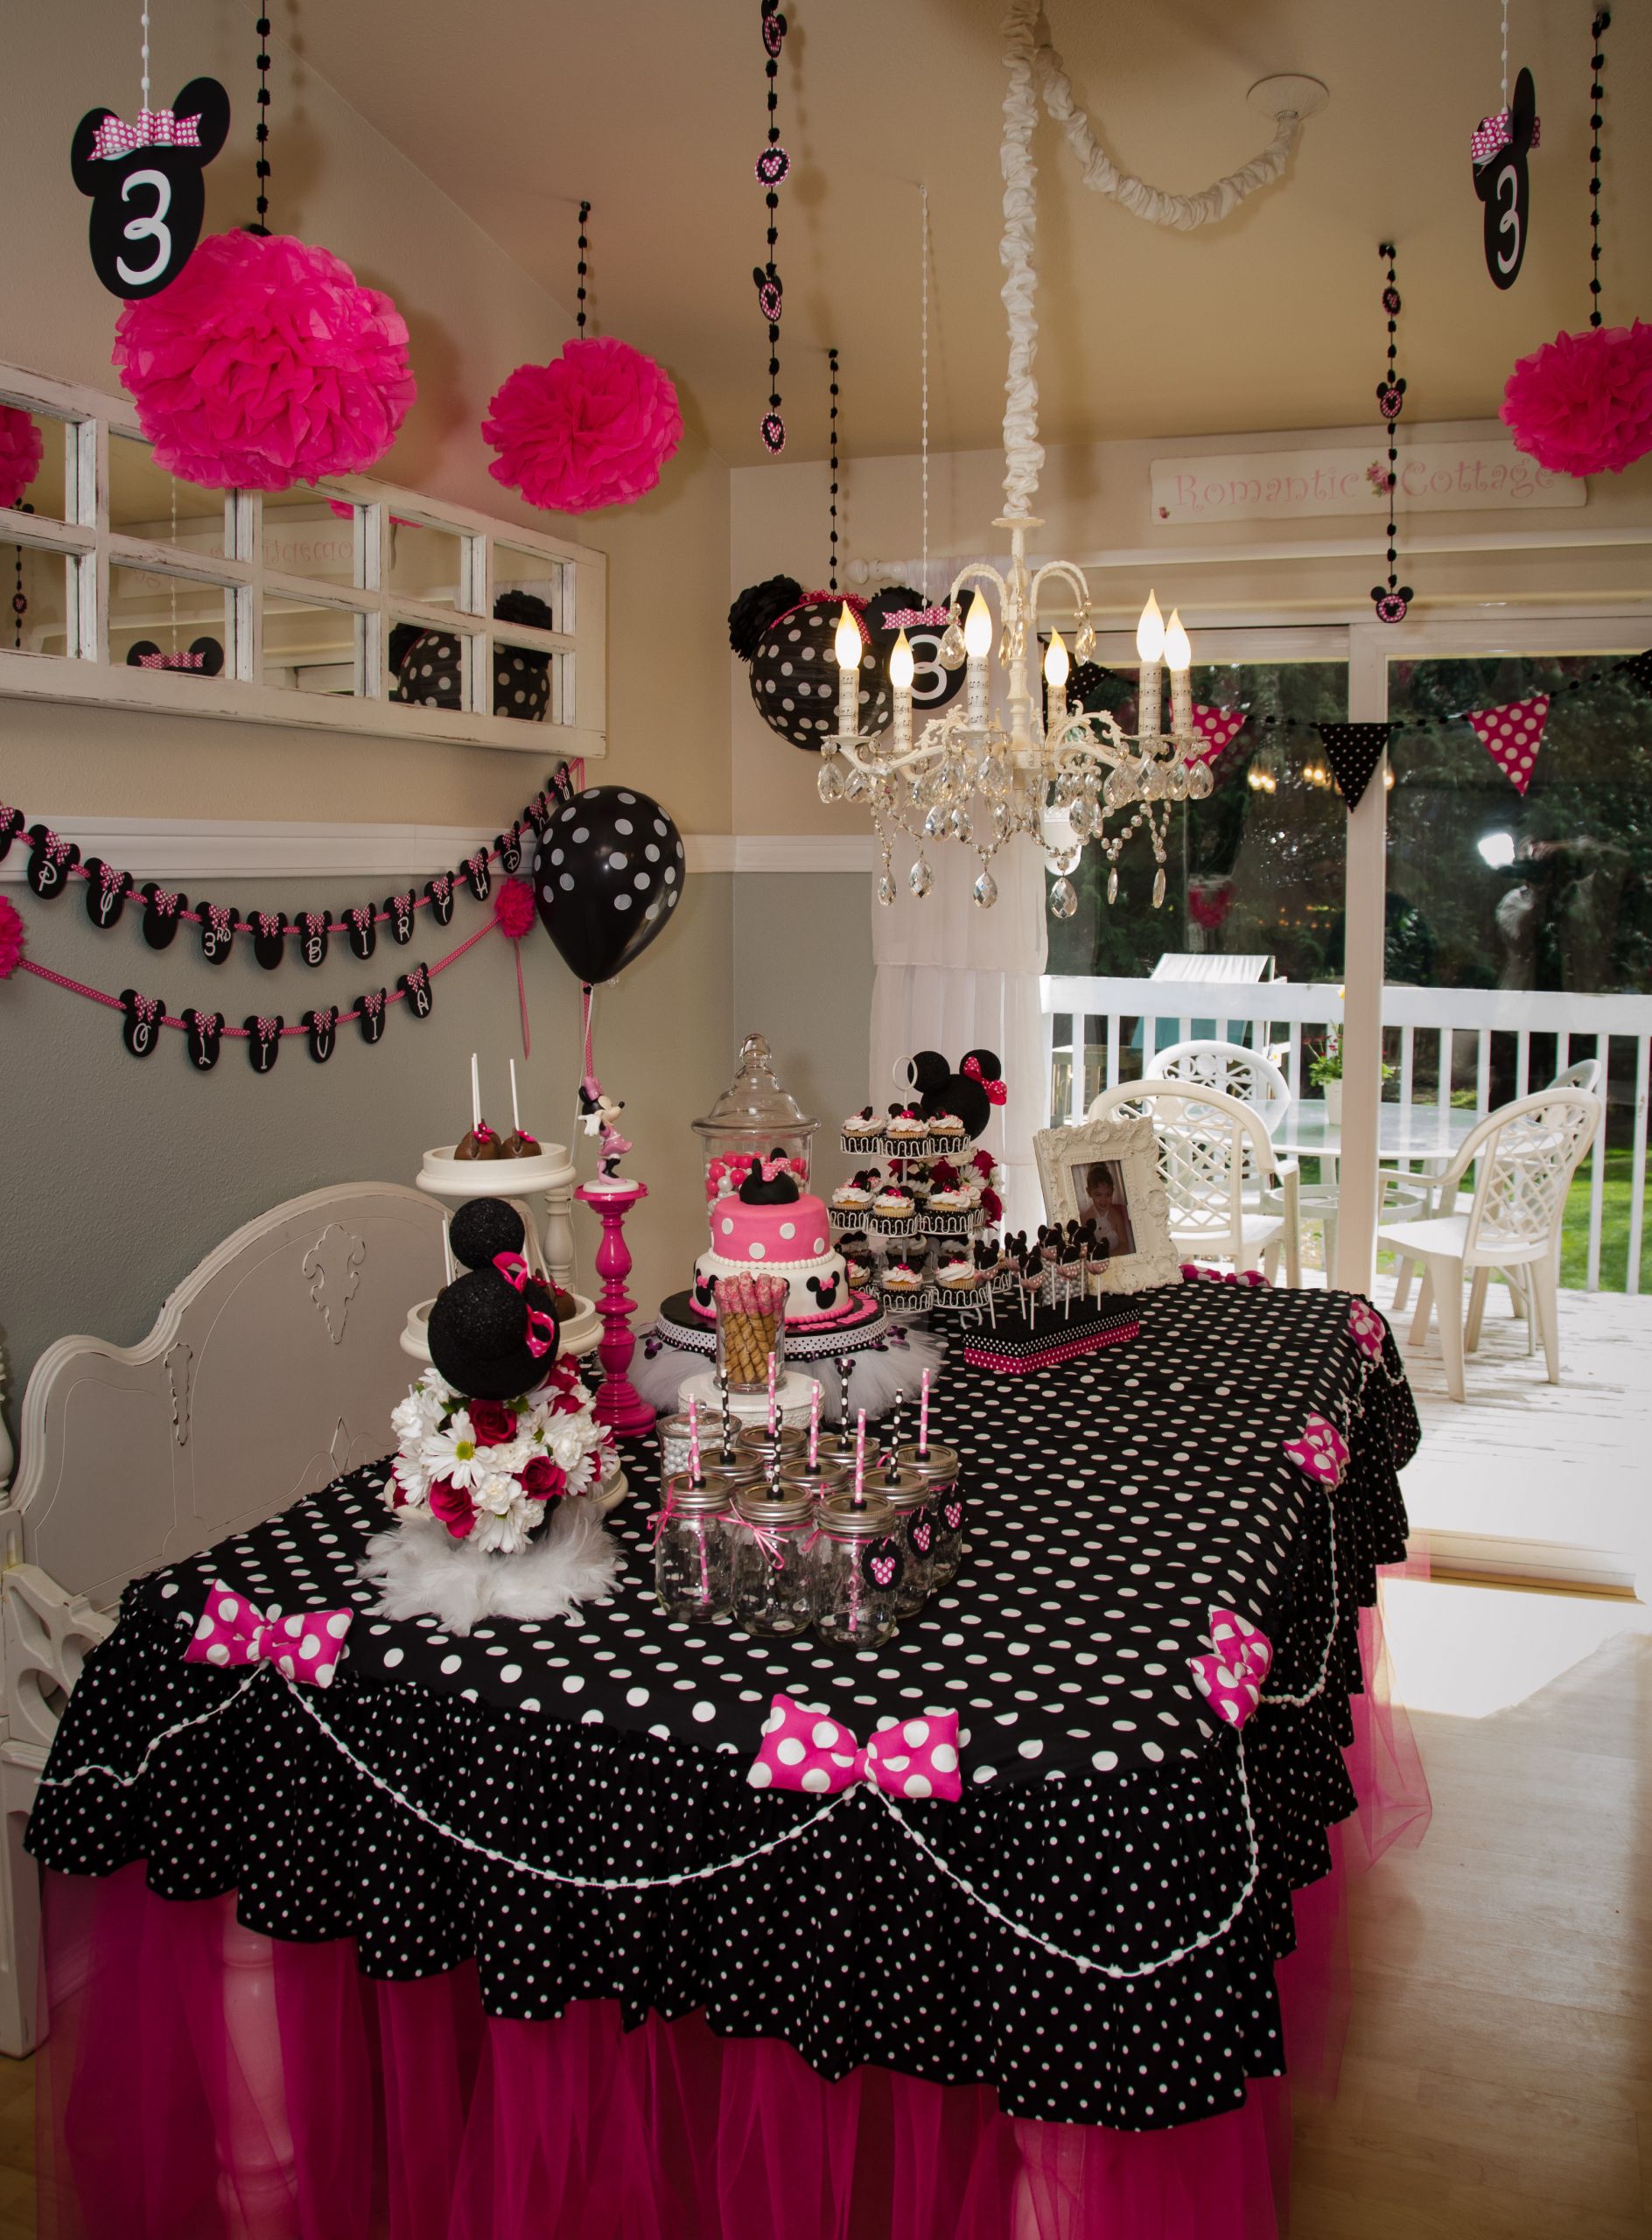 Minnie Mouse Birthday Party Decoration Ideas
 Minnie Mouse 3rd Birthday Party